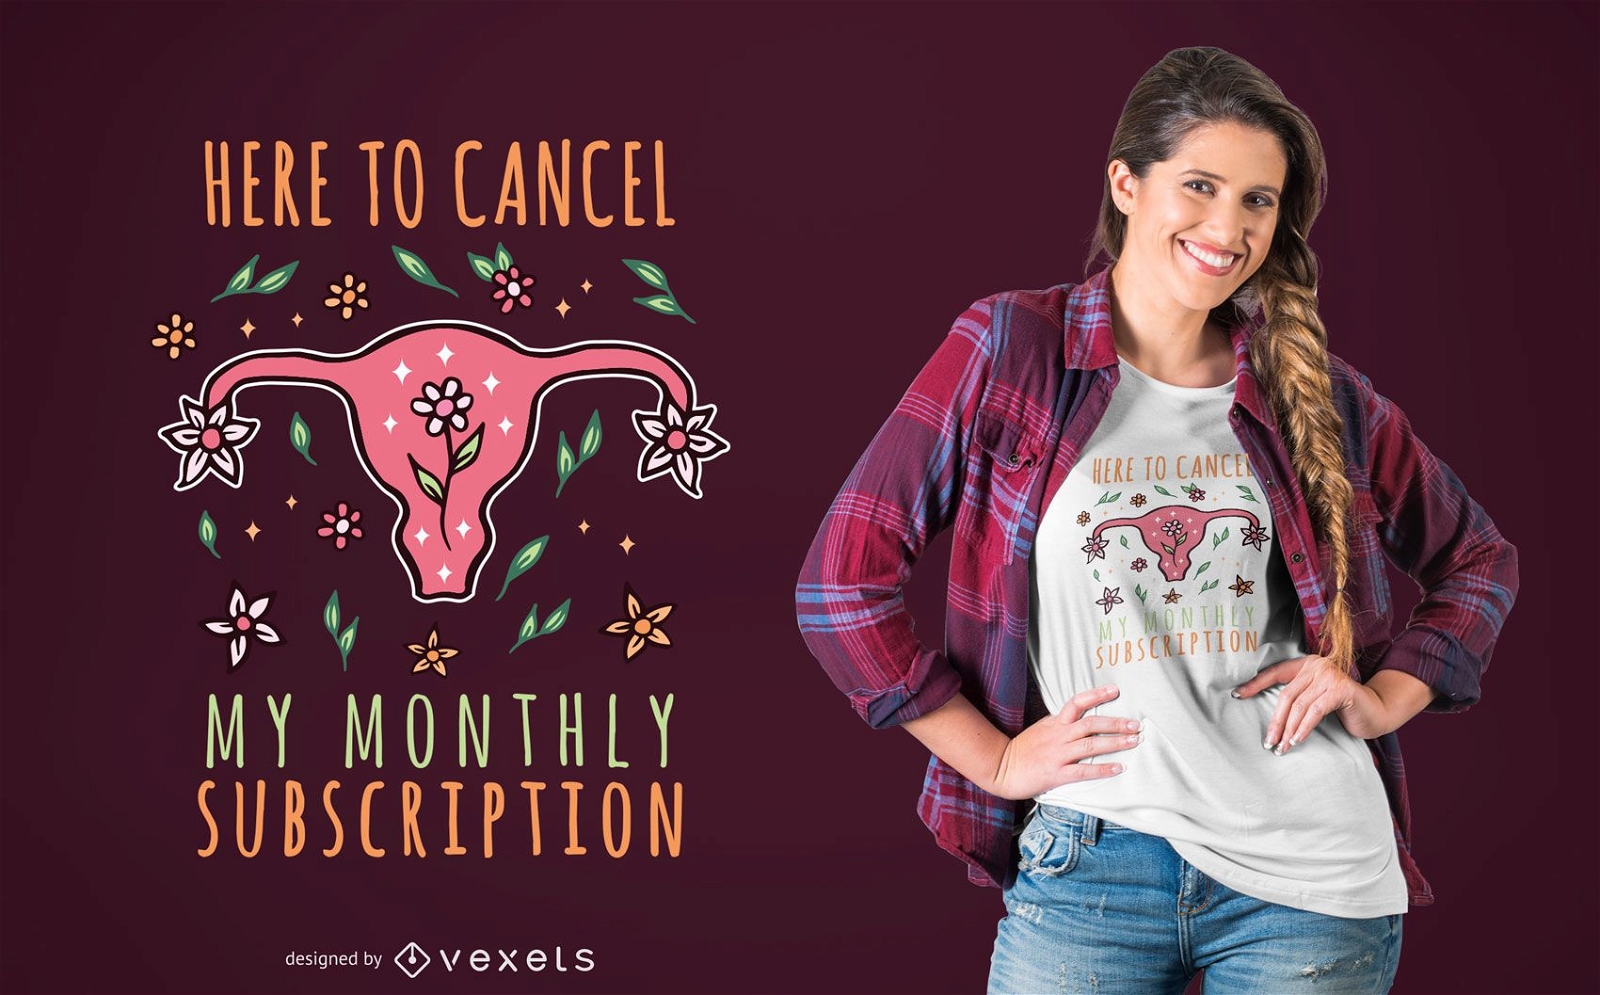 Funny hysterectomy t-shirt design